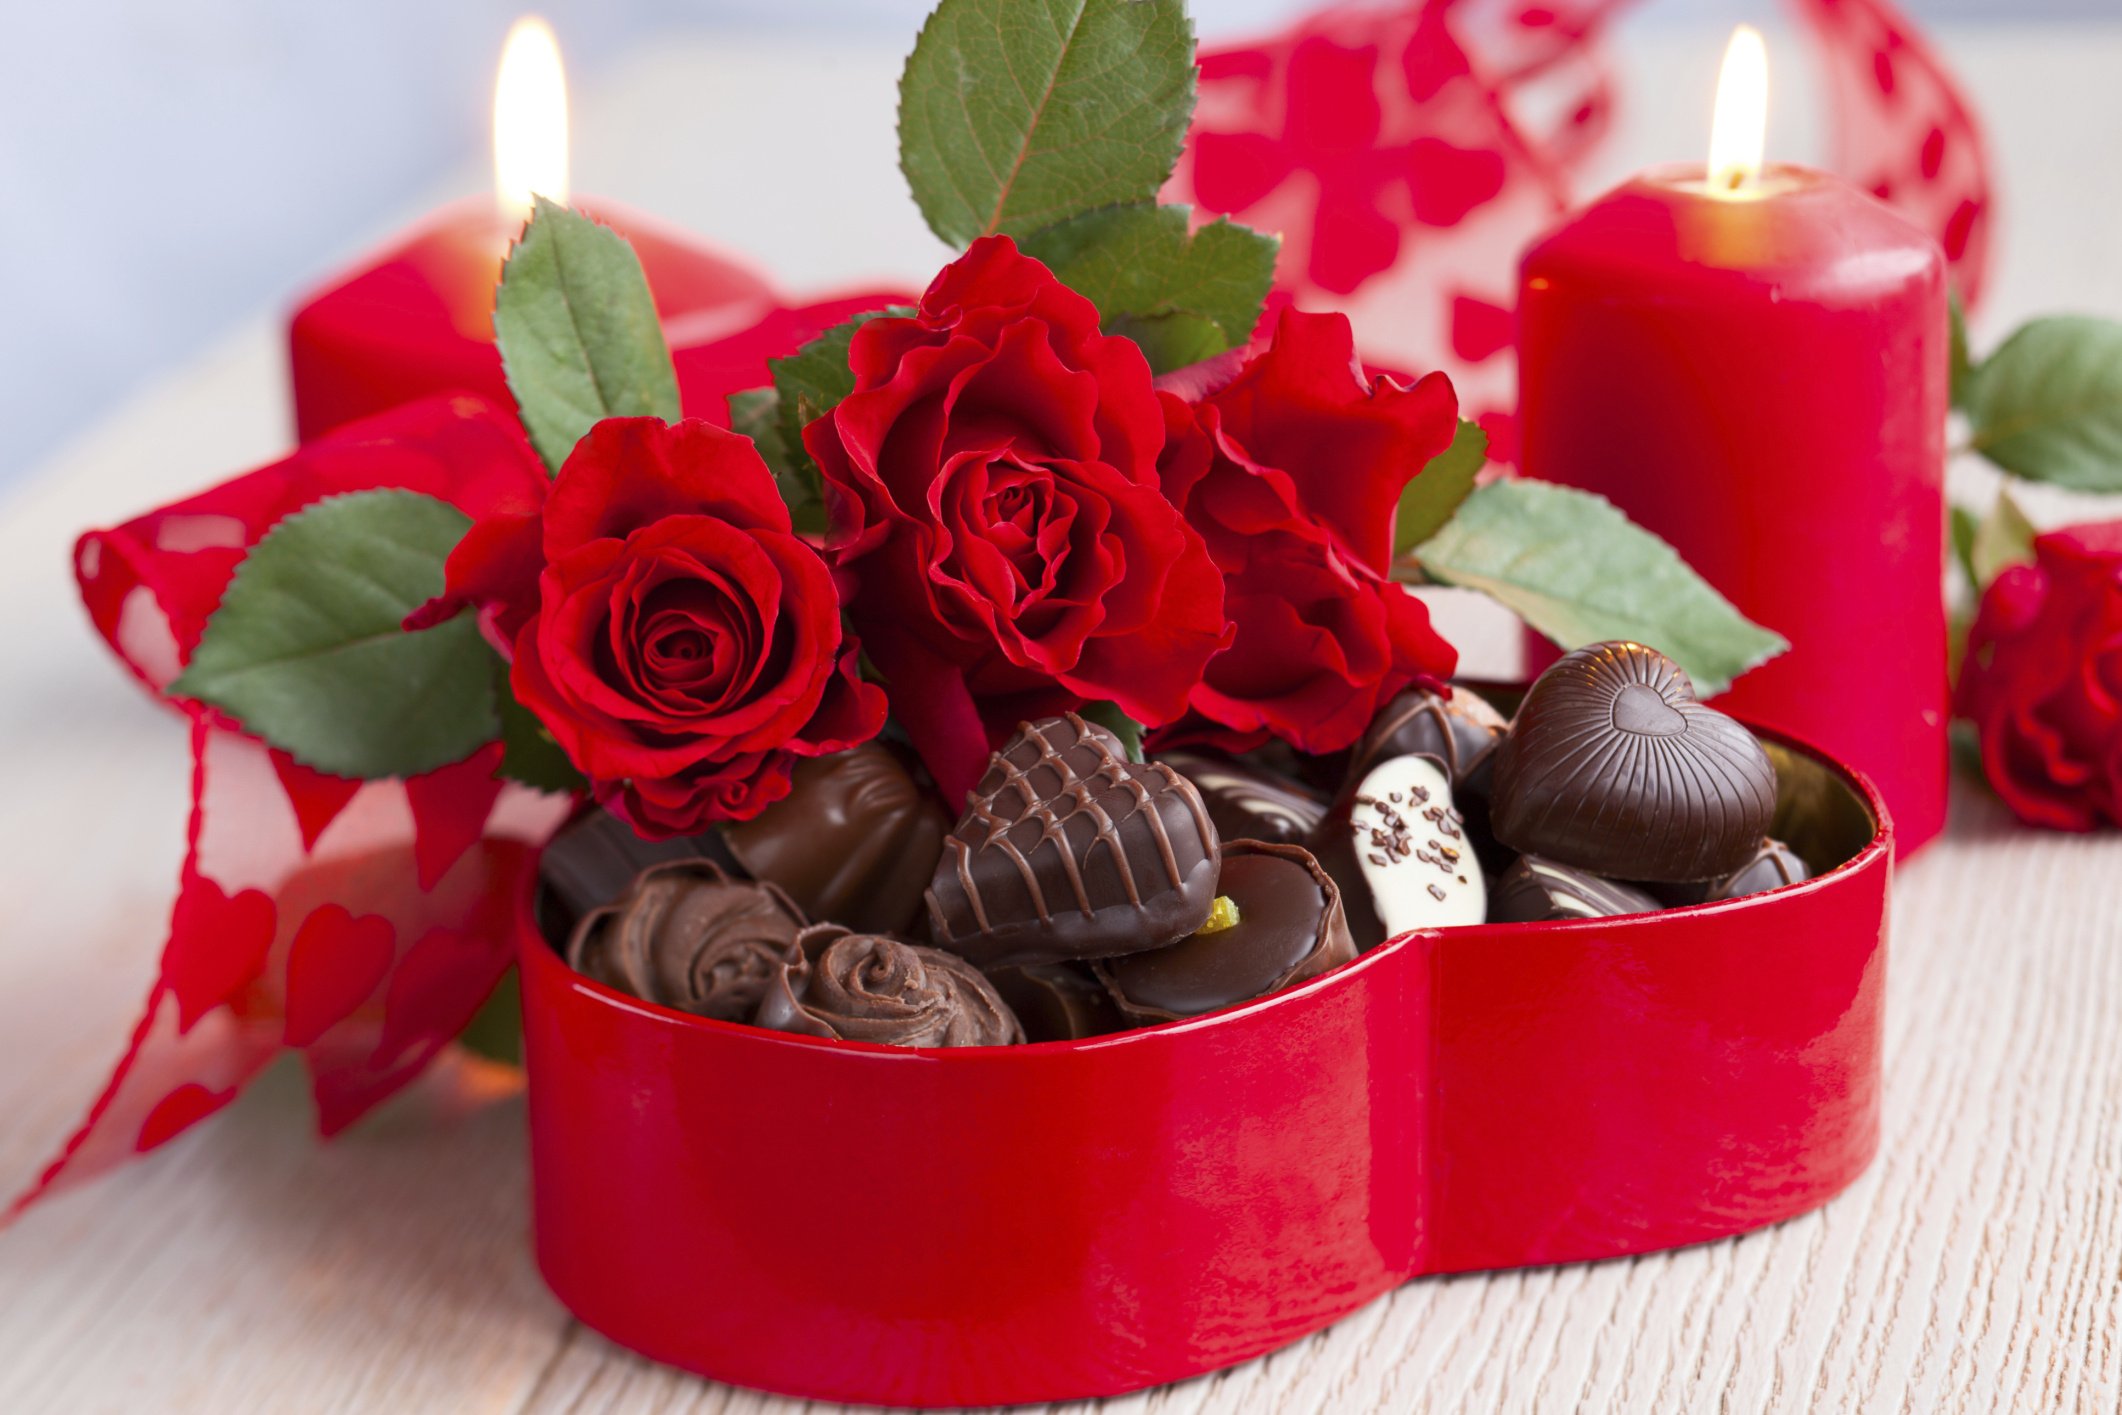 flowers, Bouquet, Love, February, 14, Holiday, Heart, Candy, Chocolate Wallpaper